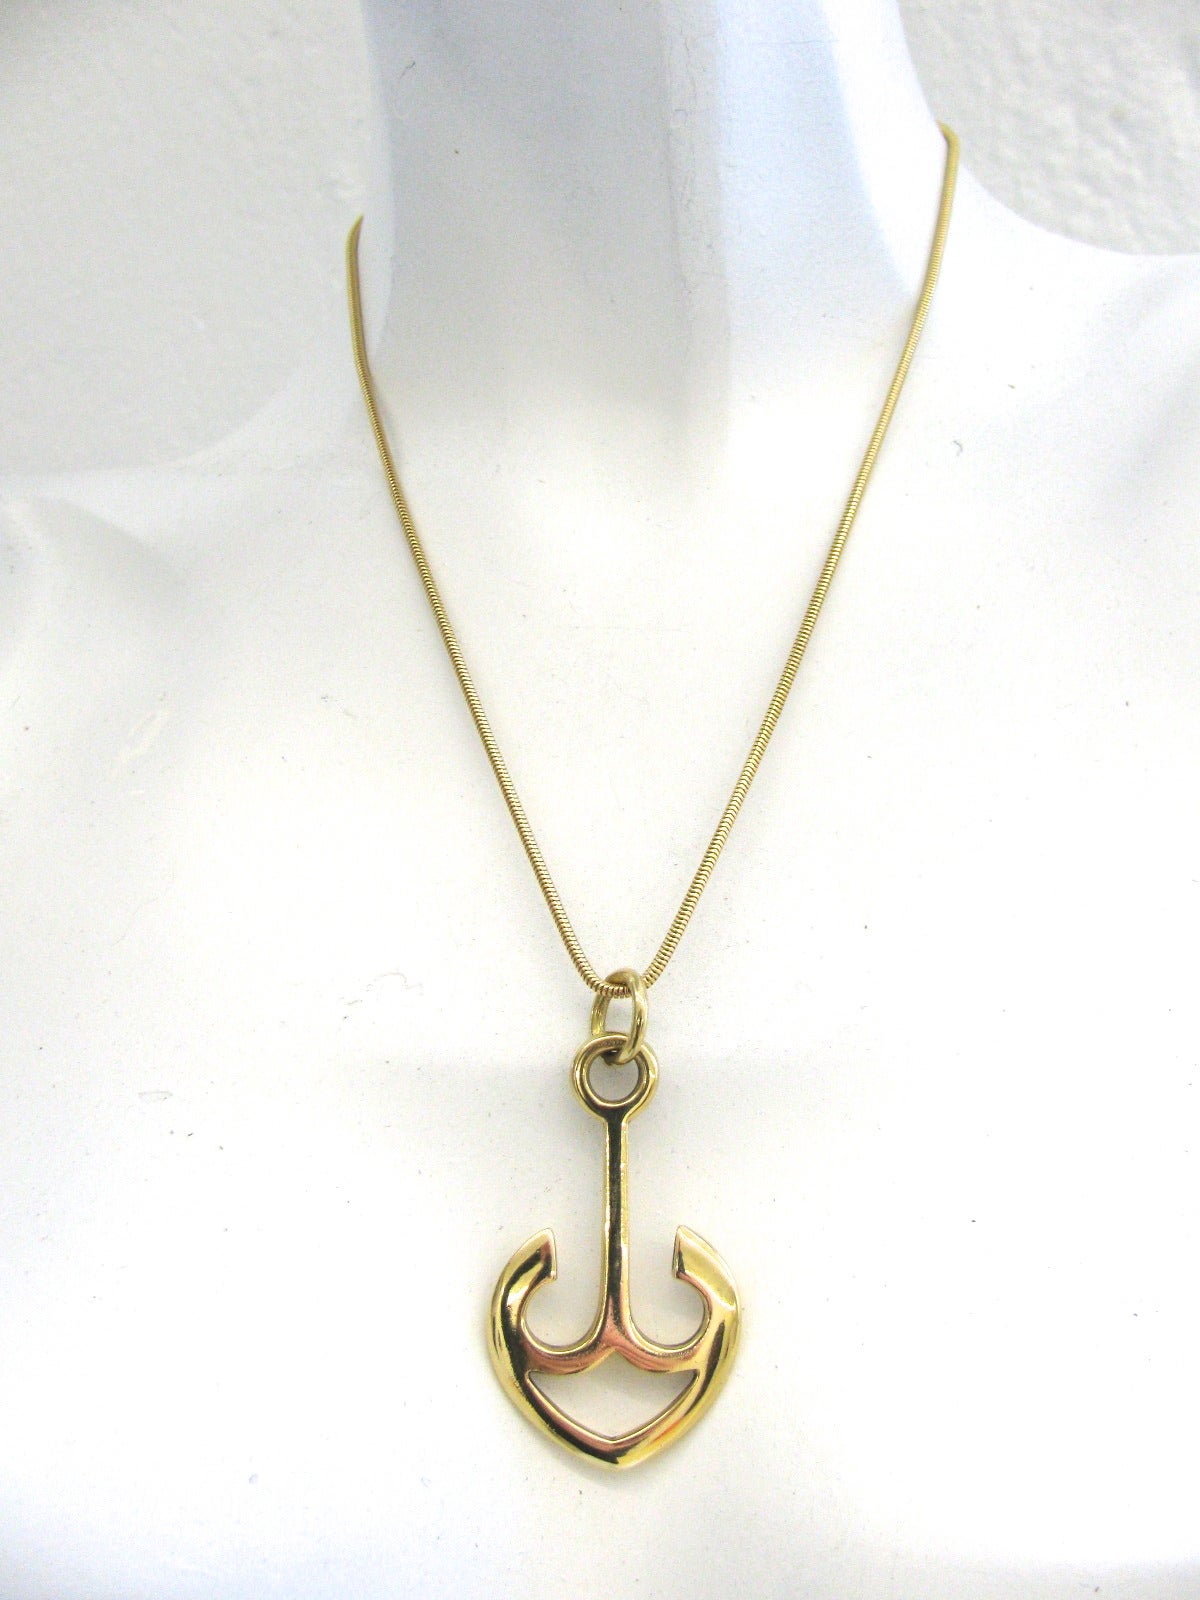 A Charming Anchor Pendant by Chaumet. The 2 1/8